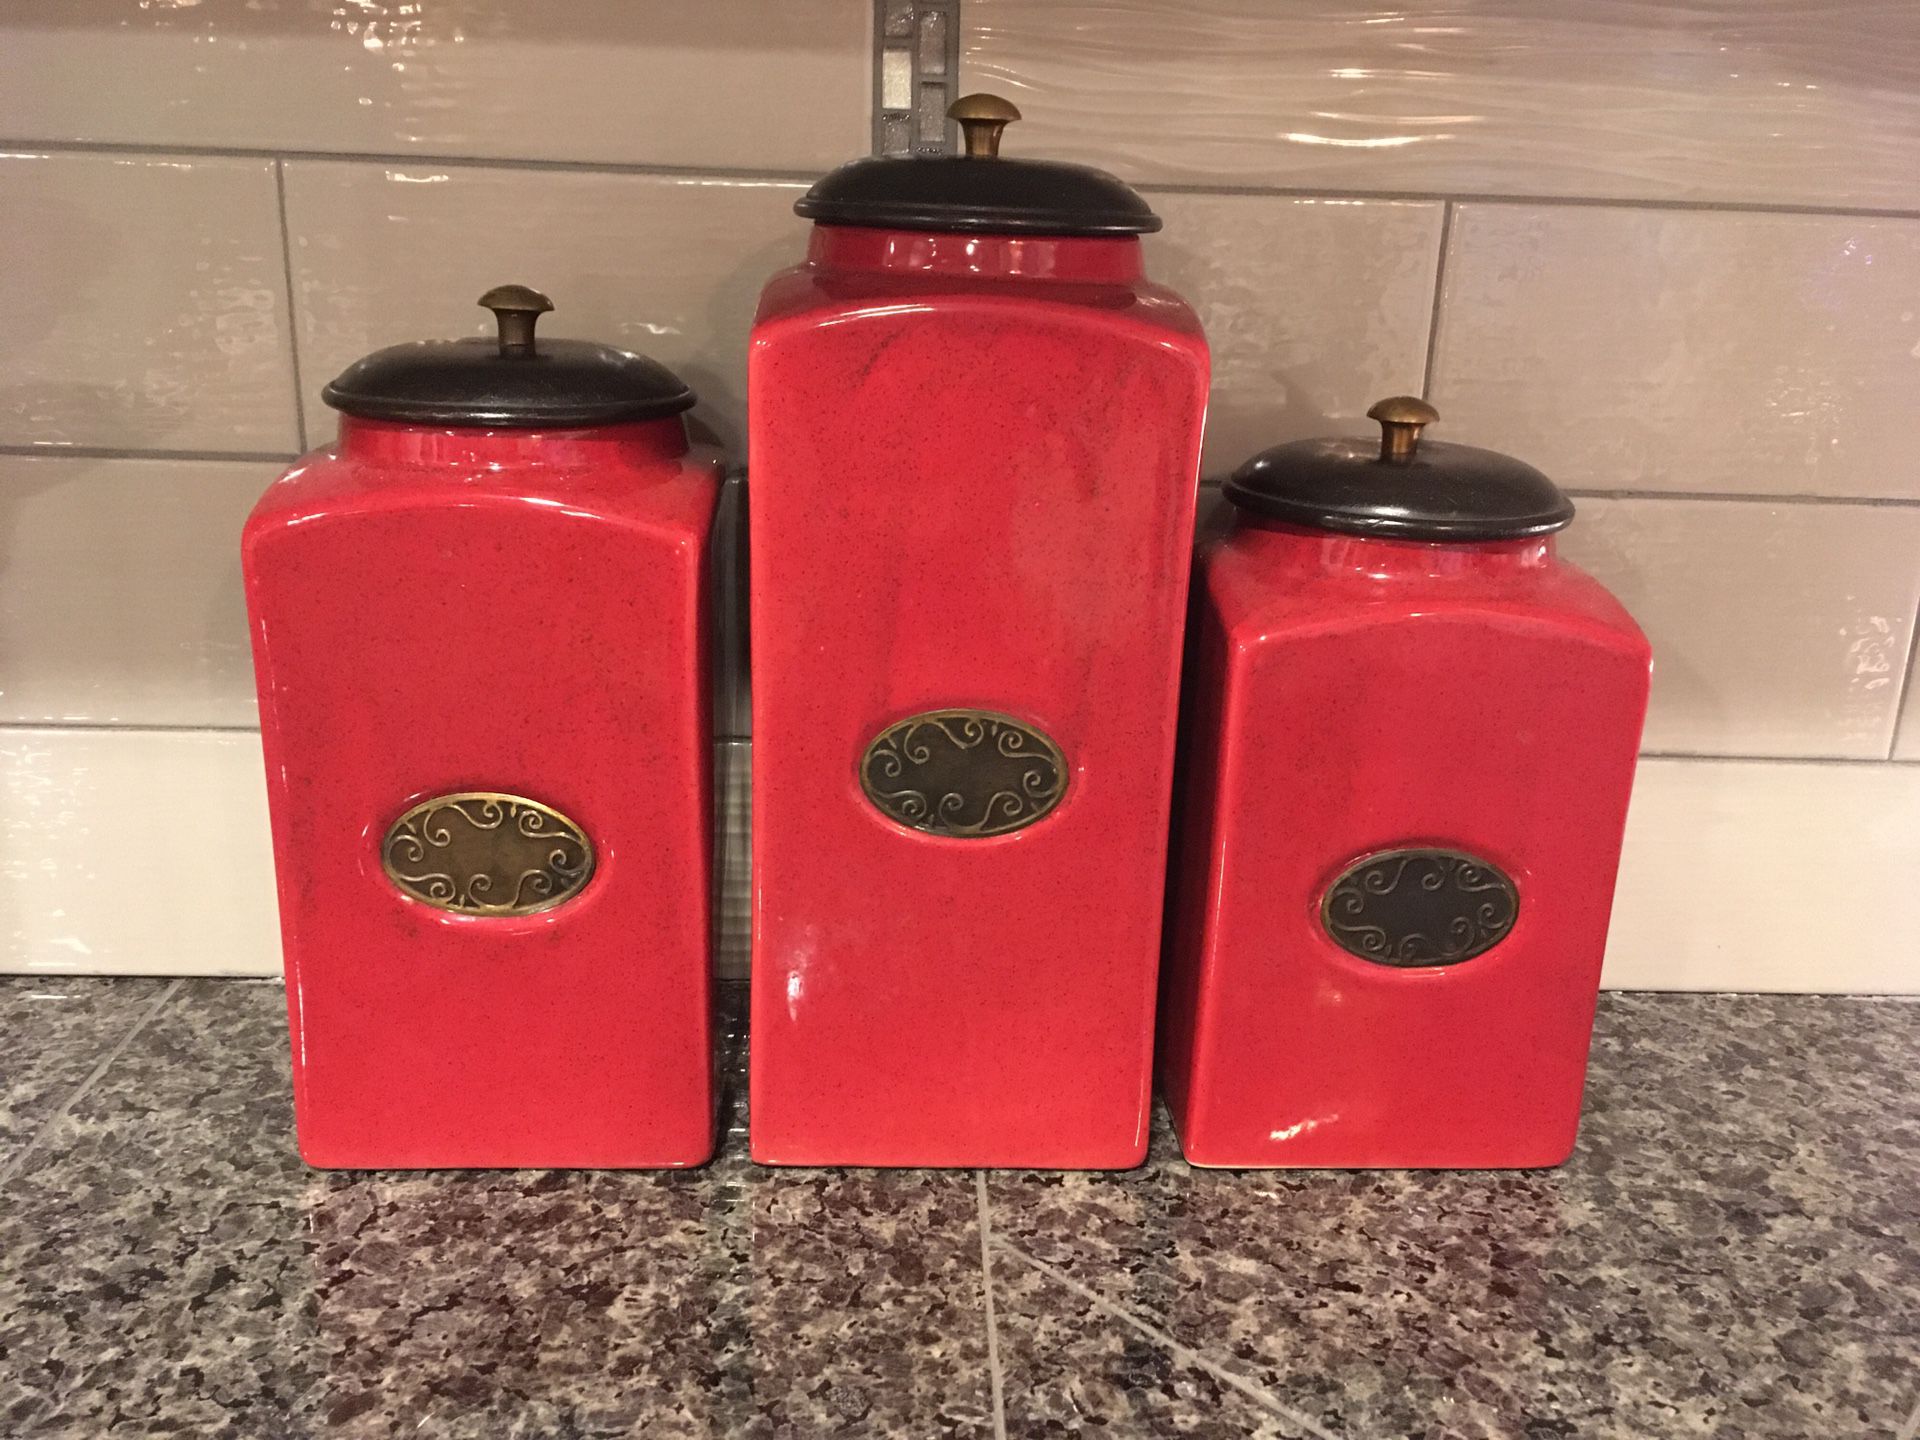 Kitchen canisters